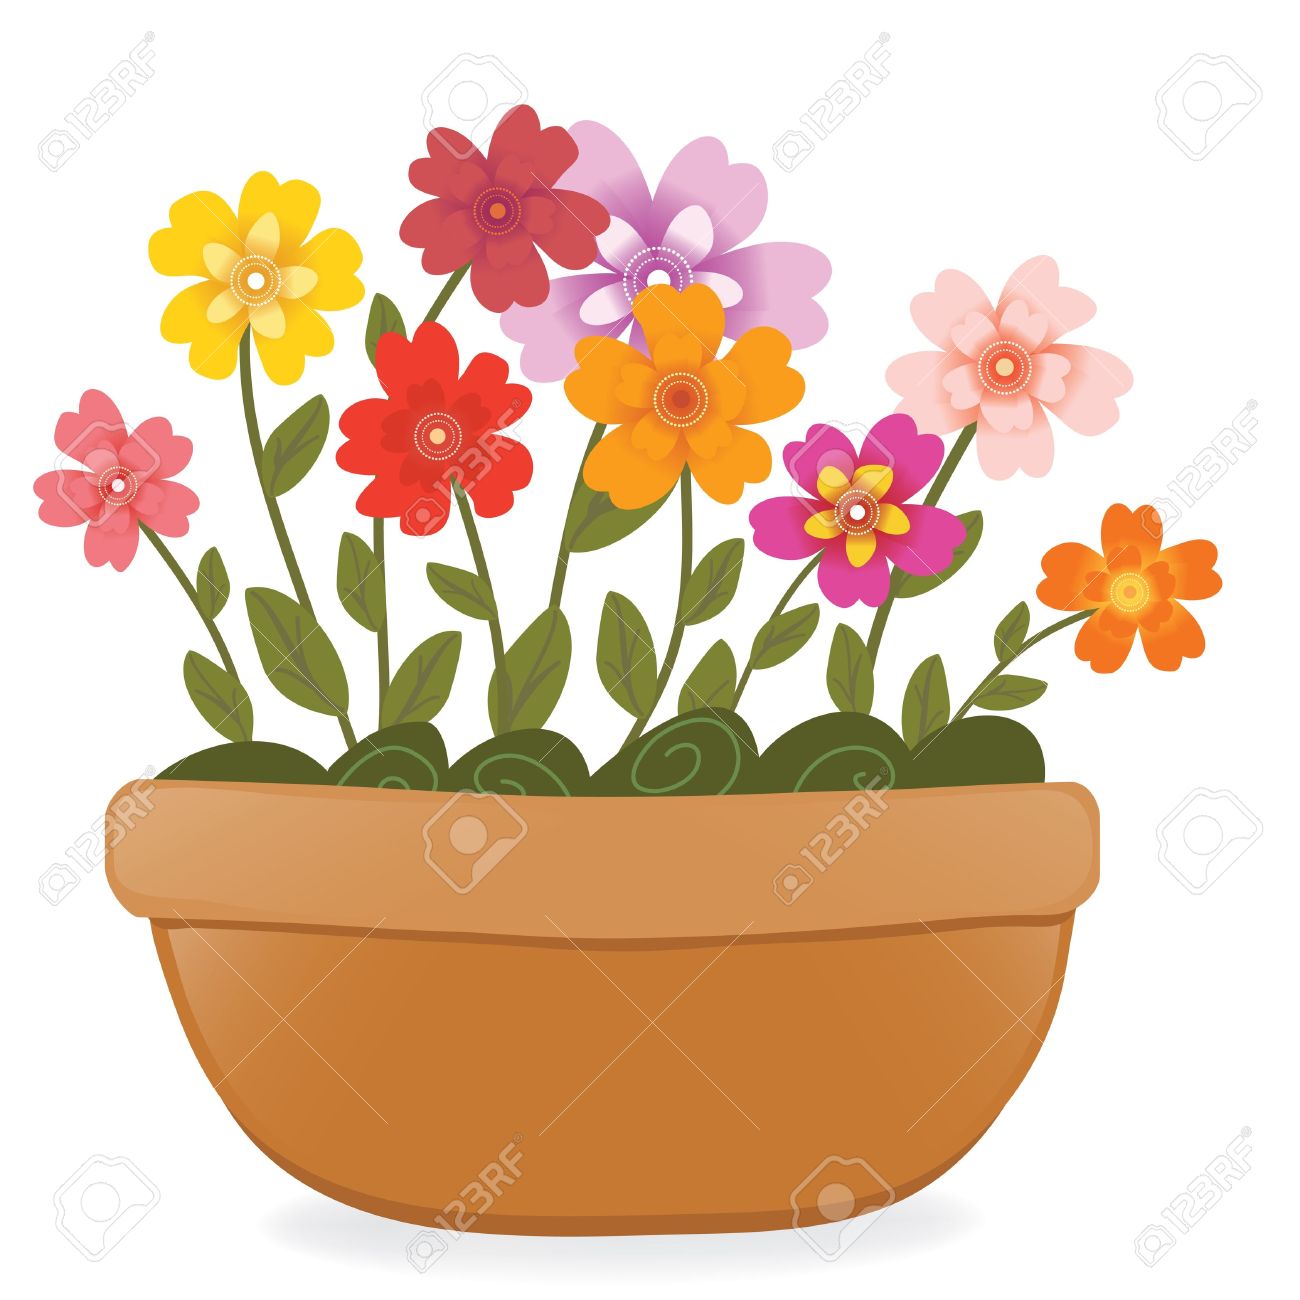 4,299 Potted Plant Cliparts, Stock Vector And Royalty Free Potted.